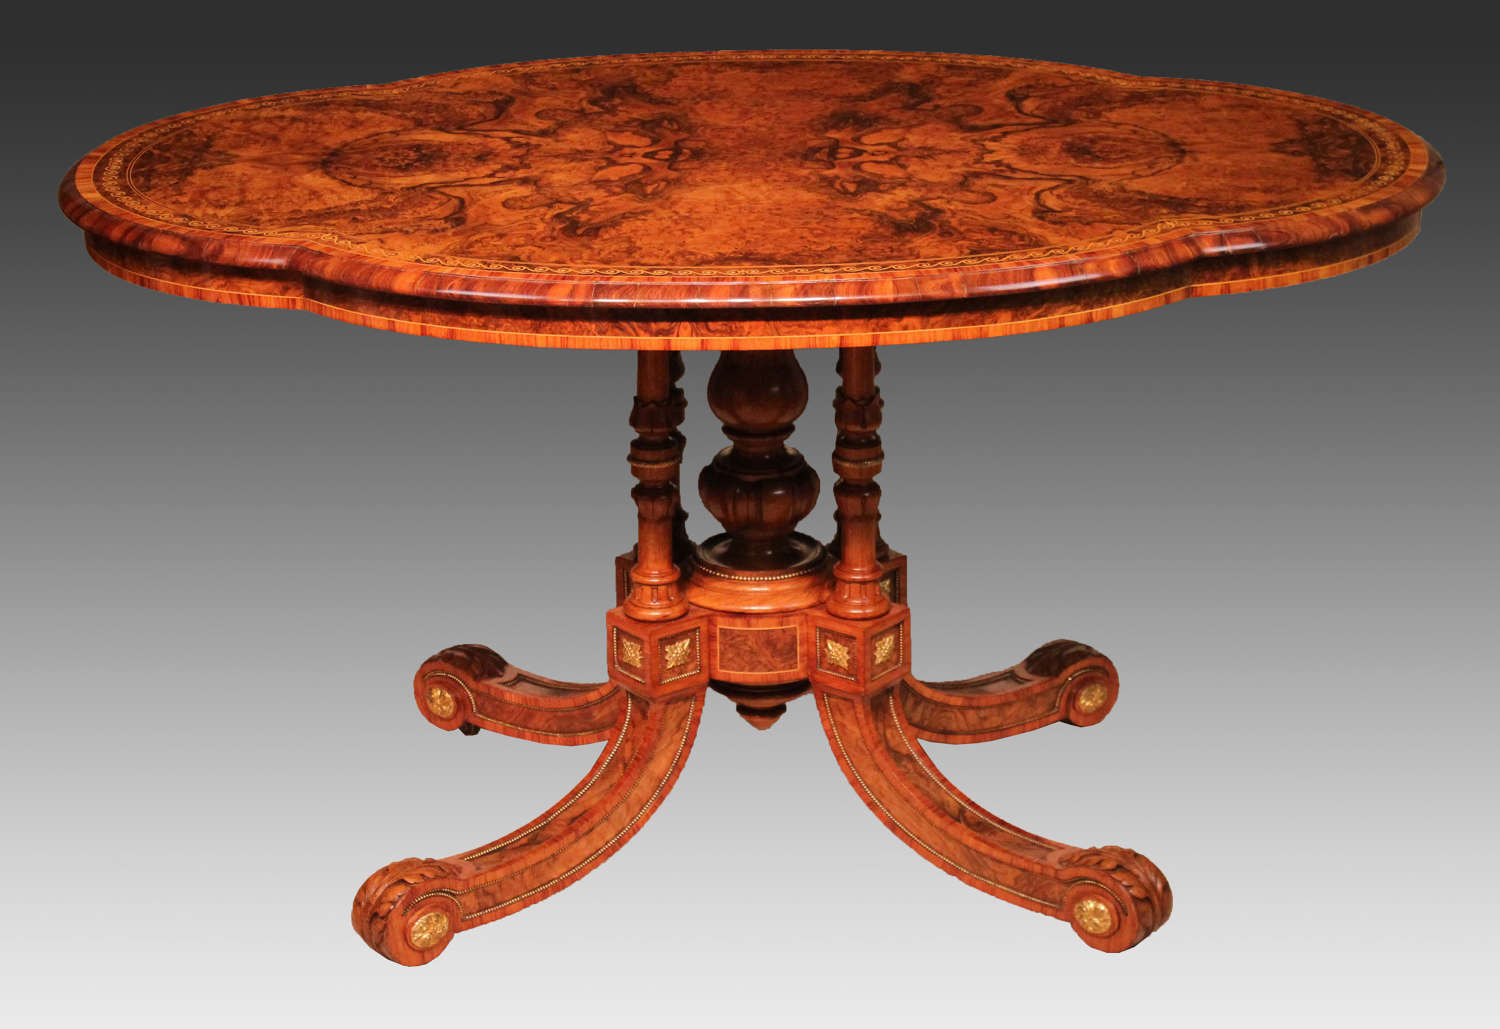 The Gillows Victorian Burr-walnut, Kingwood, Mounted Centre Table